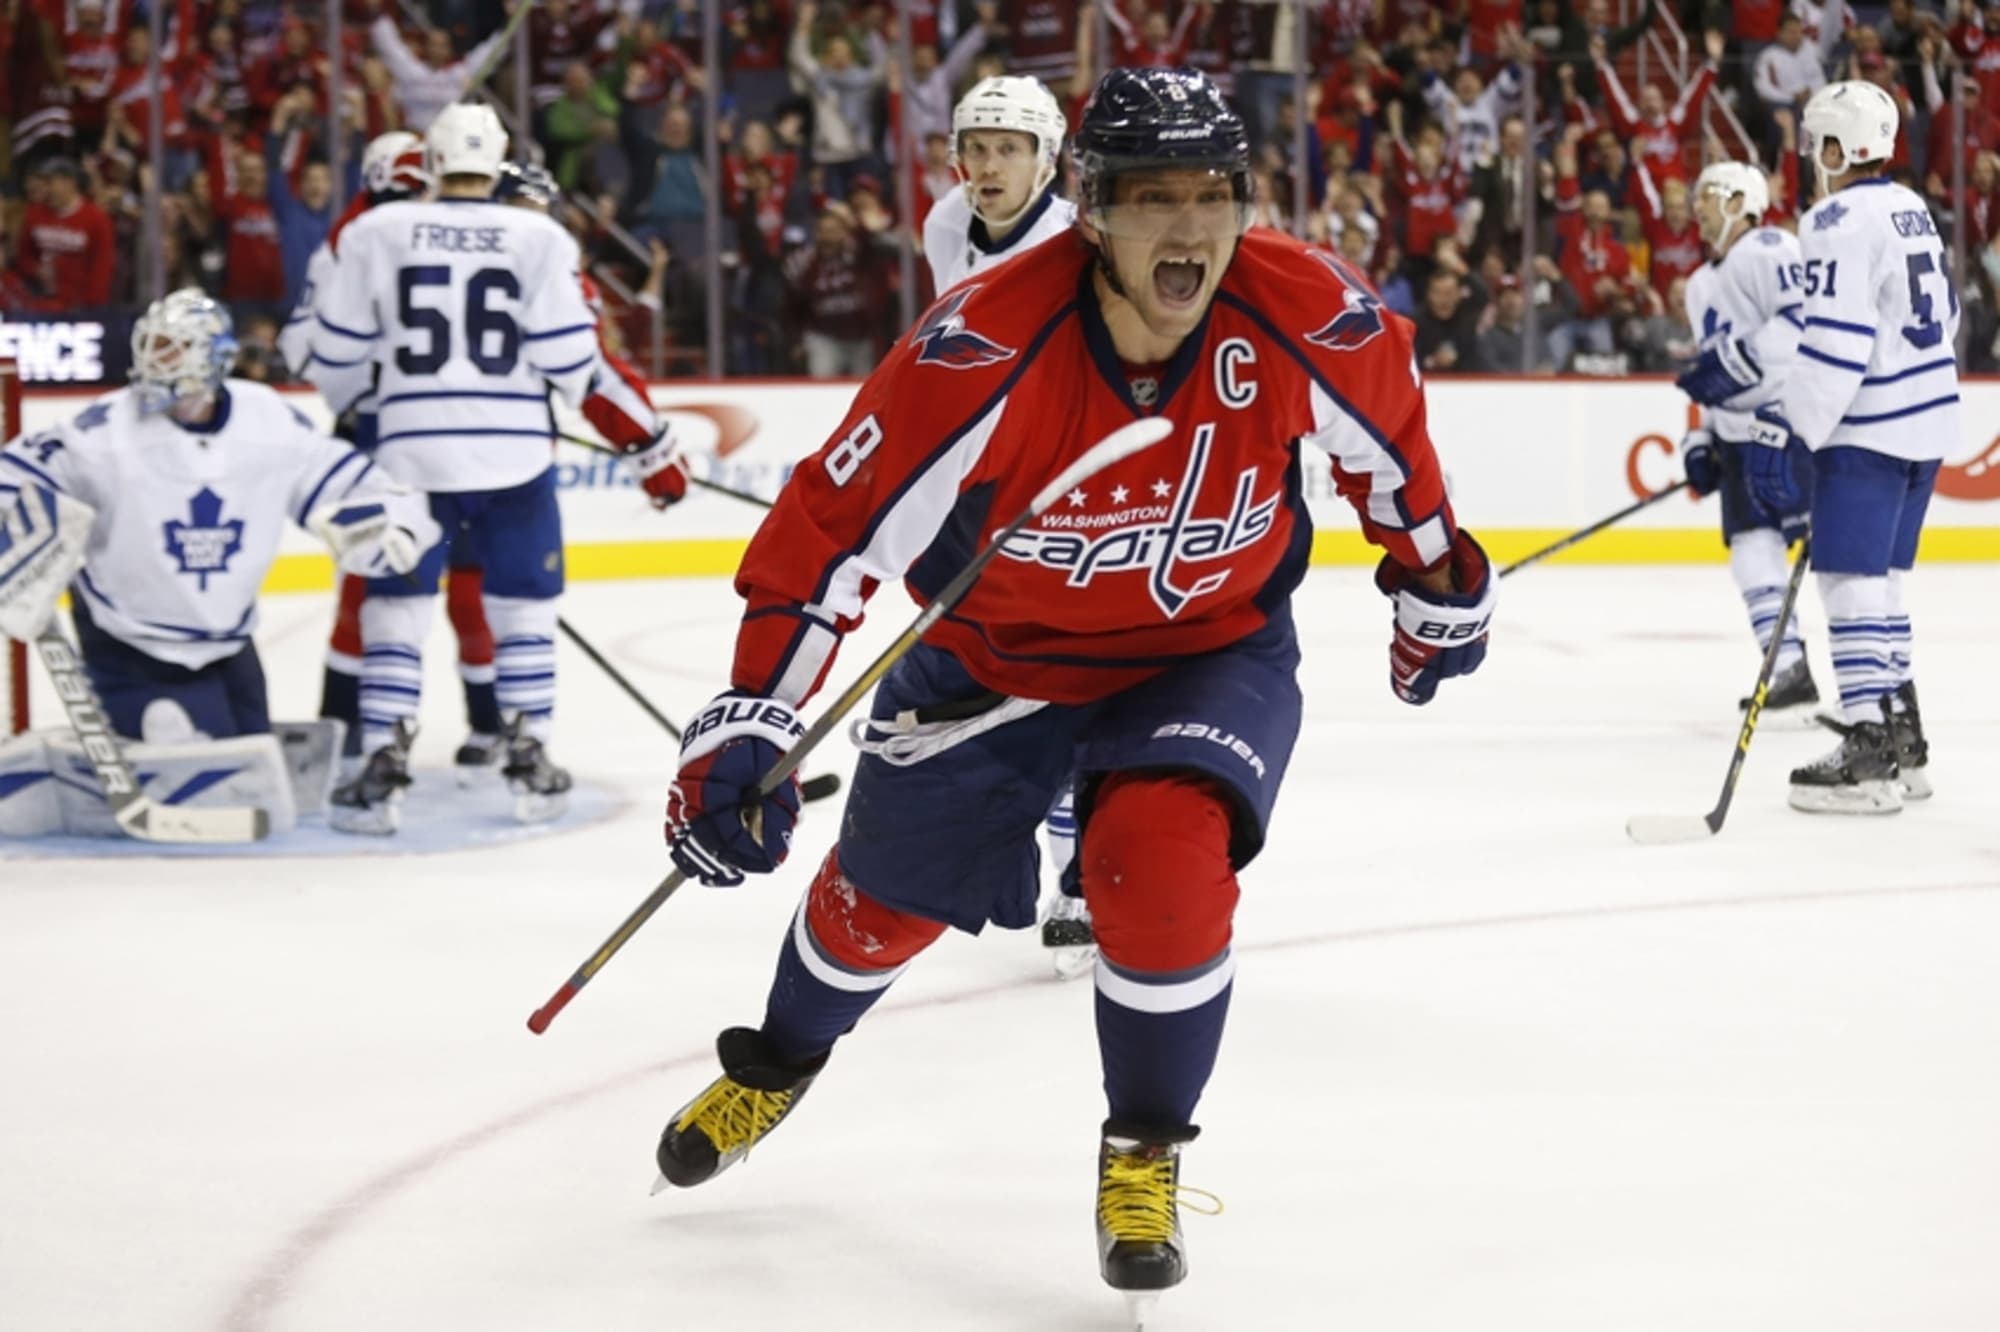 What is Alex Ovechkin's legacy now that he won the Stanley Cup?